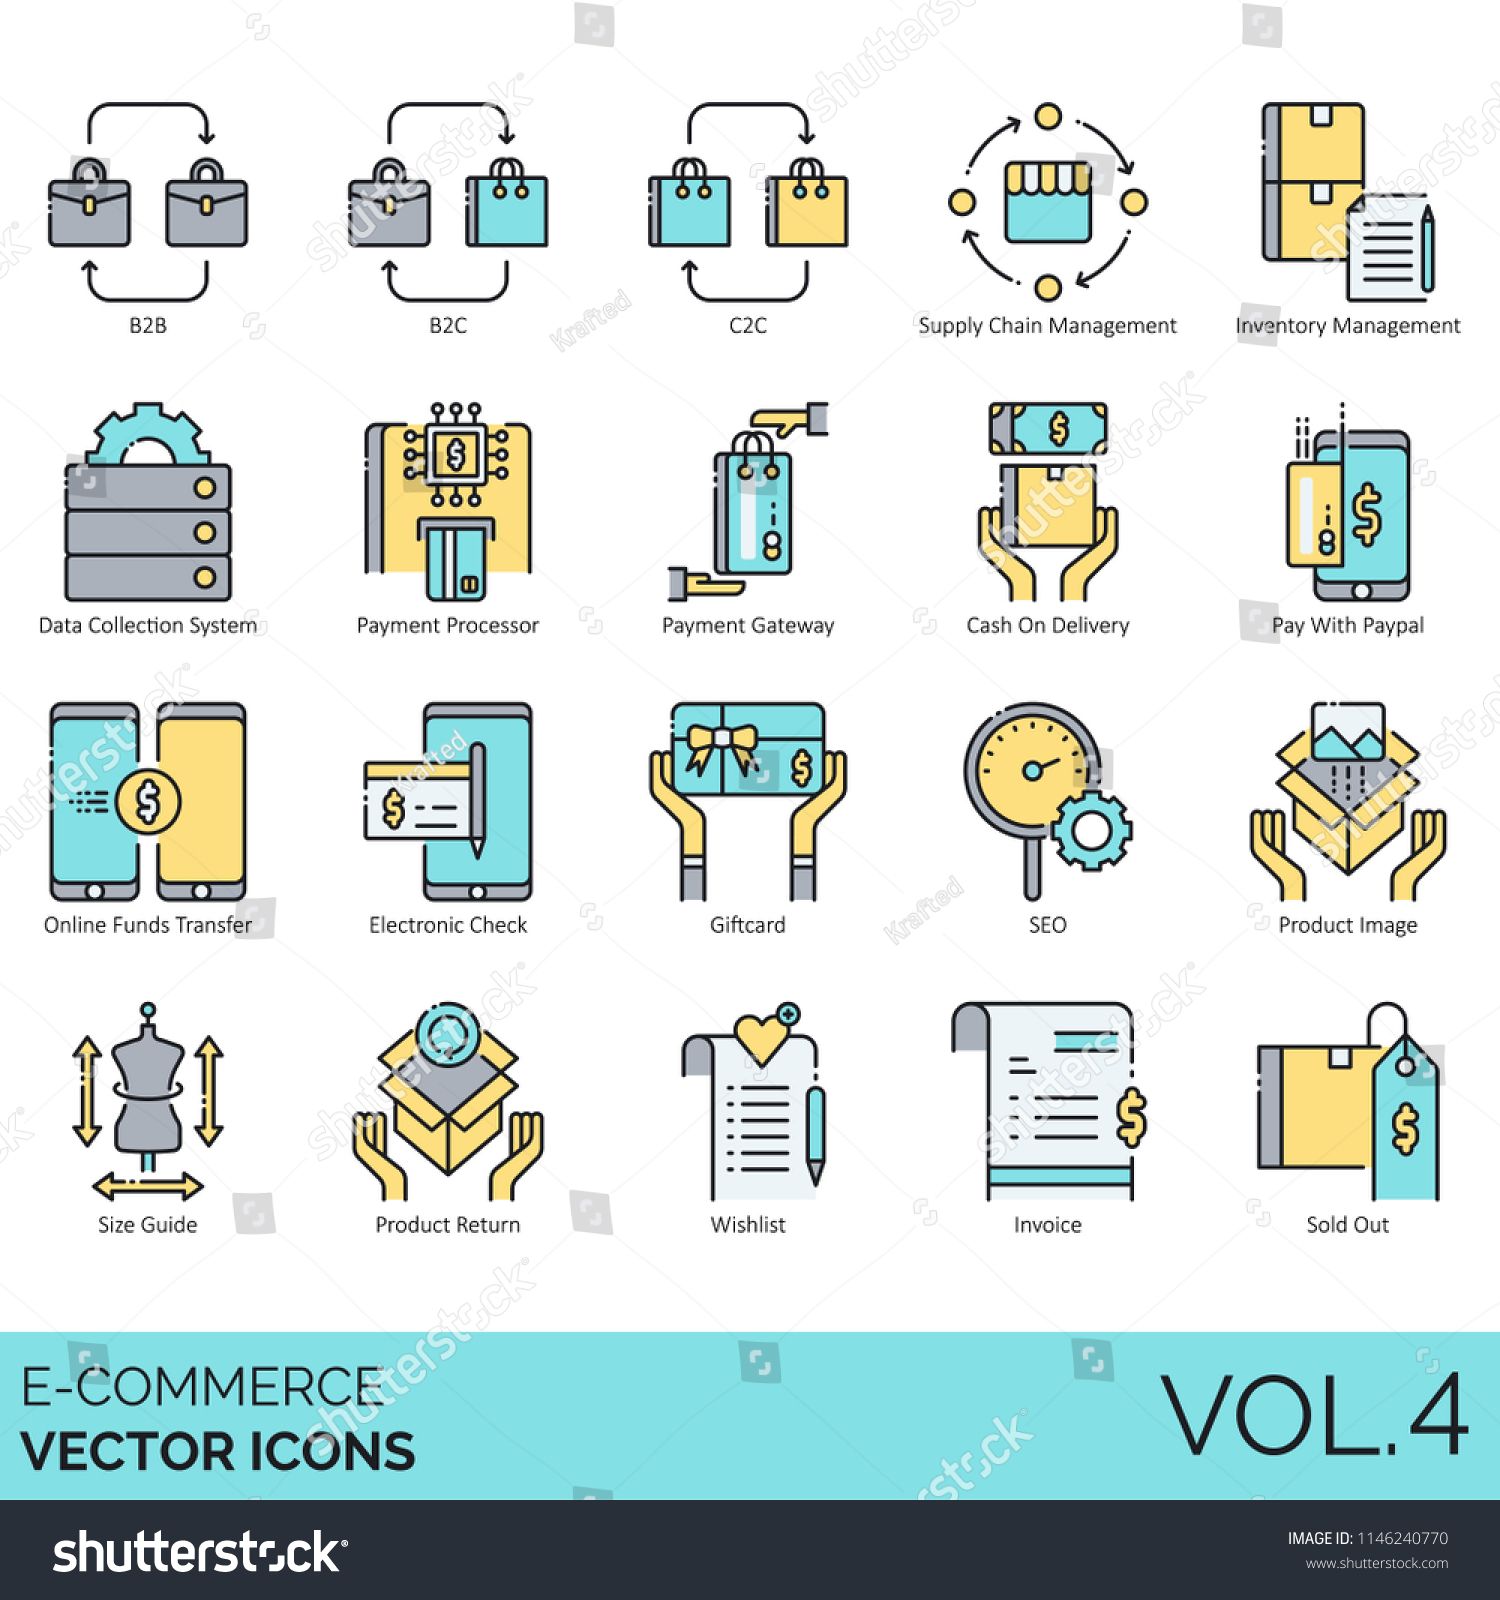 Supply Chain Management Vector At Collection Of